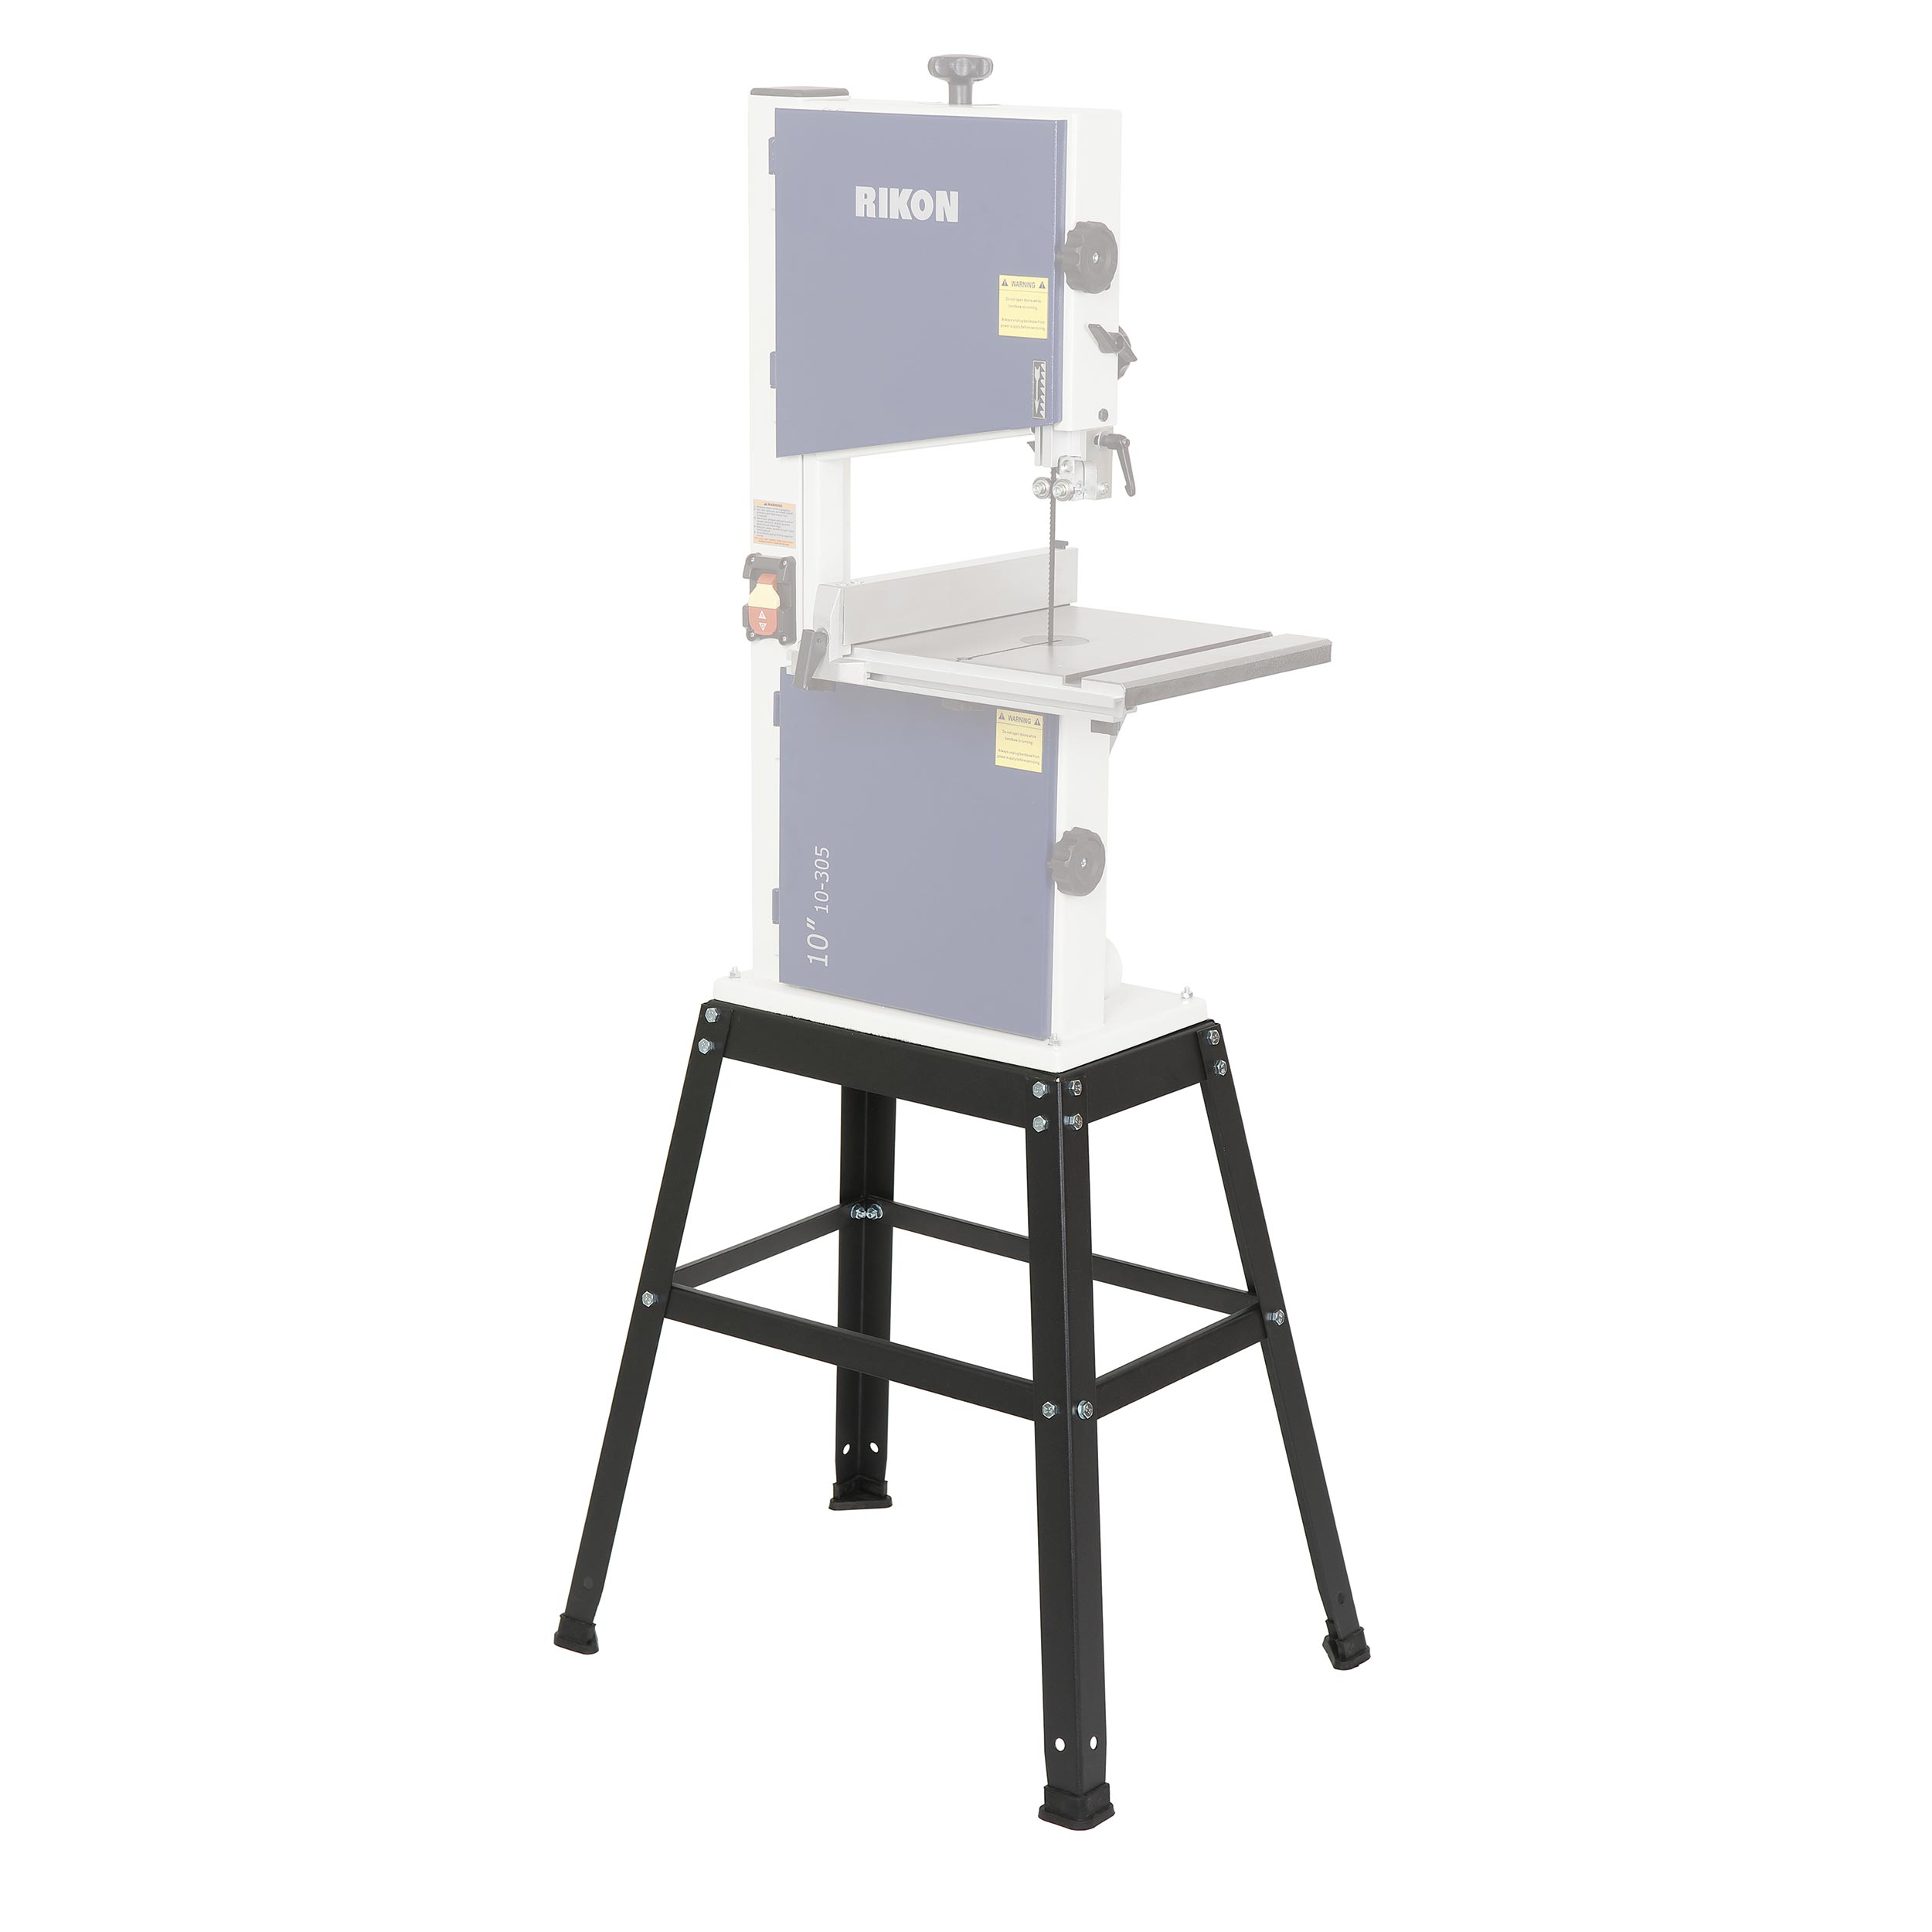 10" Bench Top Bandsaw Stand